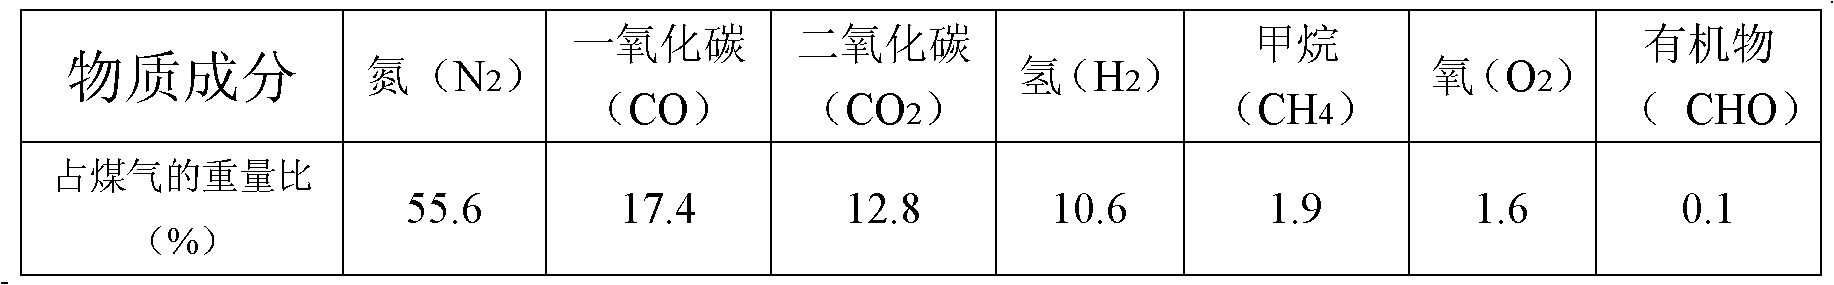 Method for preparing coal gas, top-grade active carbon, water glass and silicate phosphate from rice hulls